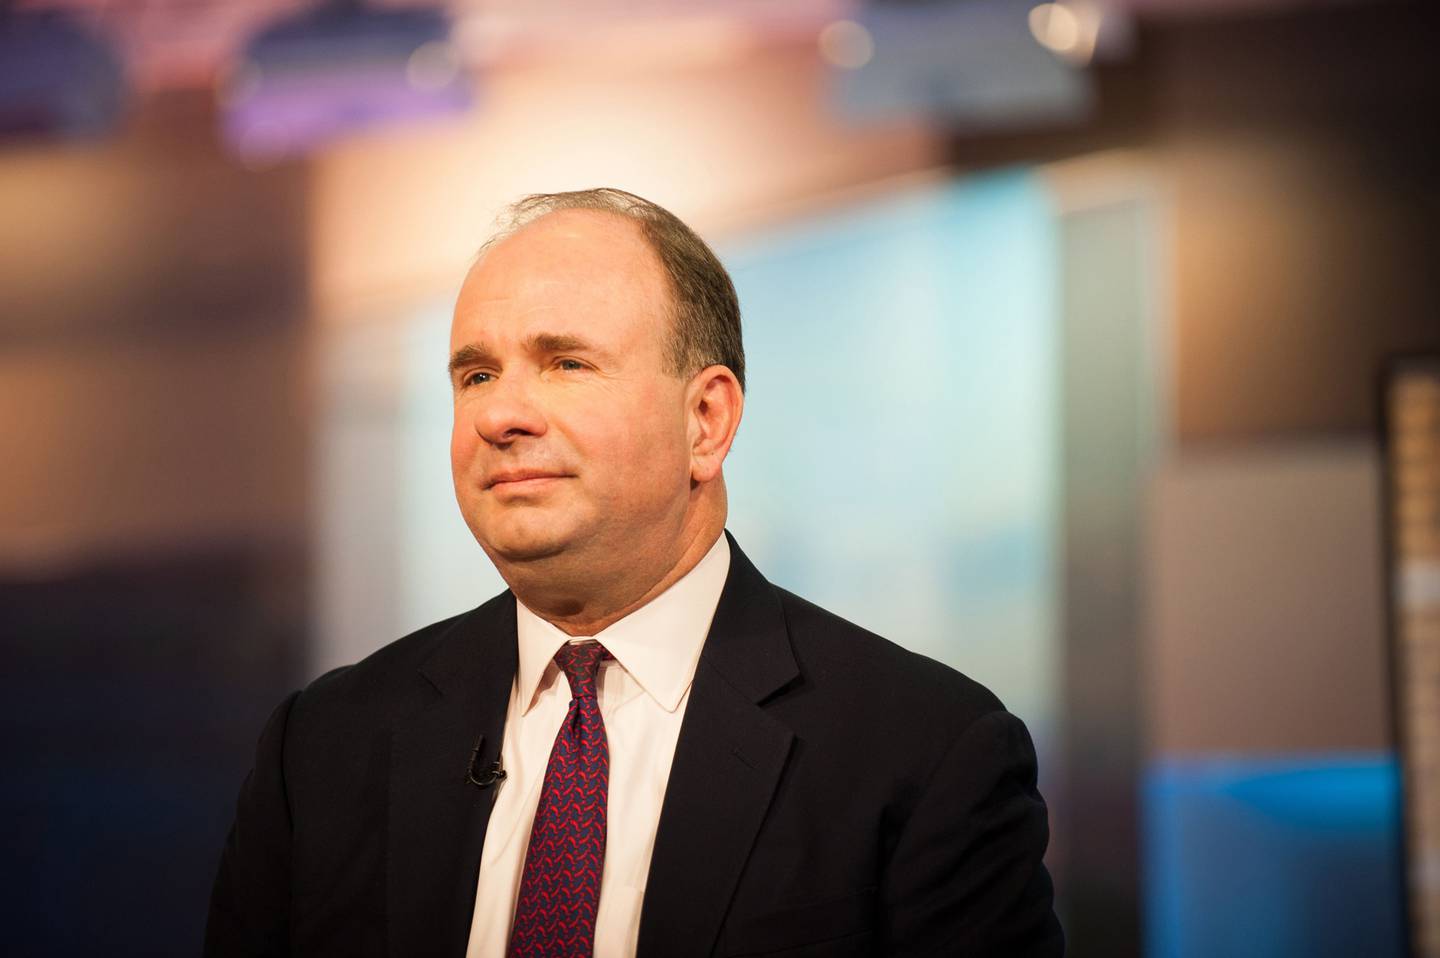 Bob Michele, global chief investment officer of JP Morgan Investment Management Inc., listens during a Bloomberg Television interview in New York, U.S., on Monday, Dec. 12, 2016. Michele weighed in on Italy's referendum, debt and economy.